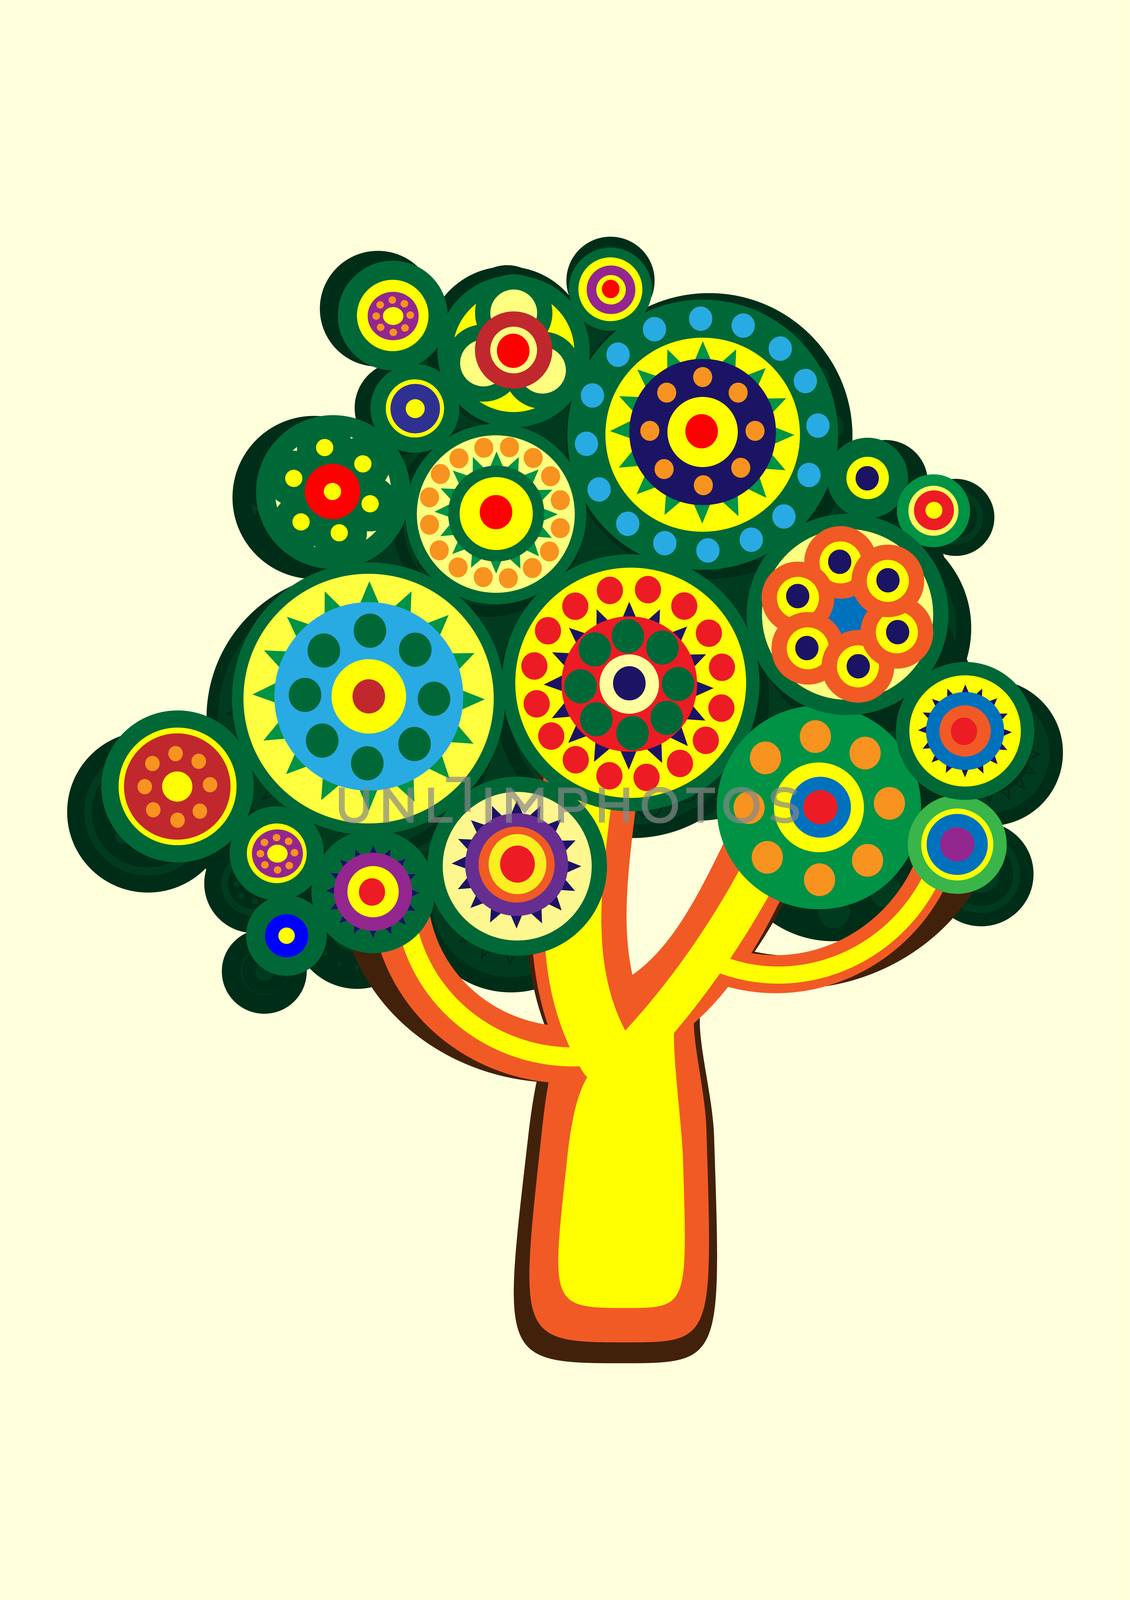 Cartoon multi-colored tree in a circle. by Adamchuk